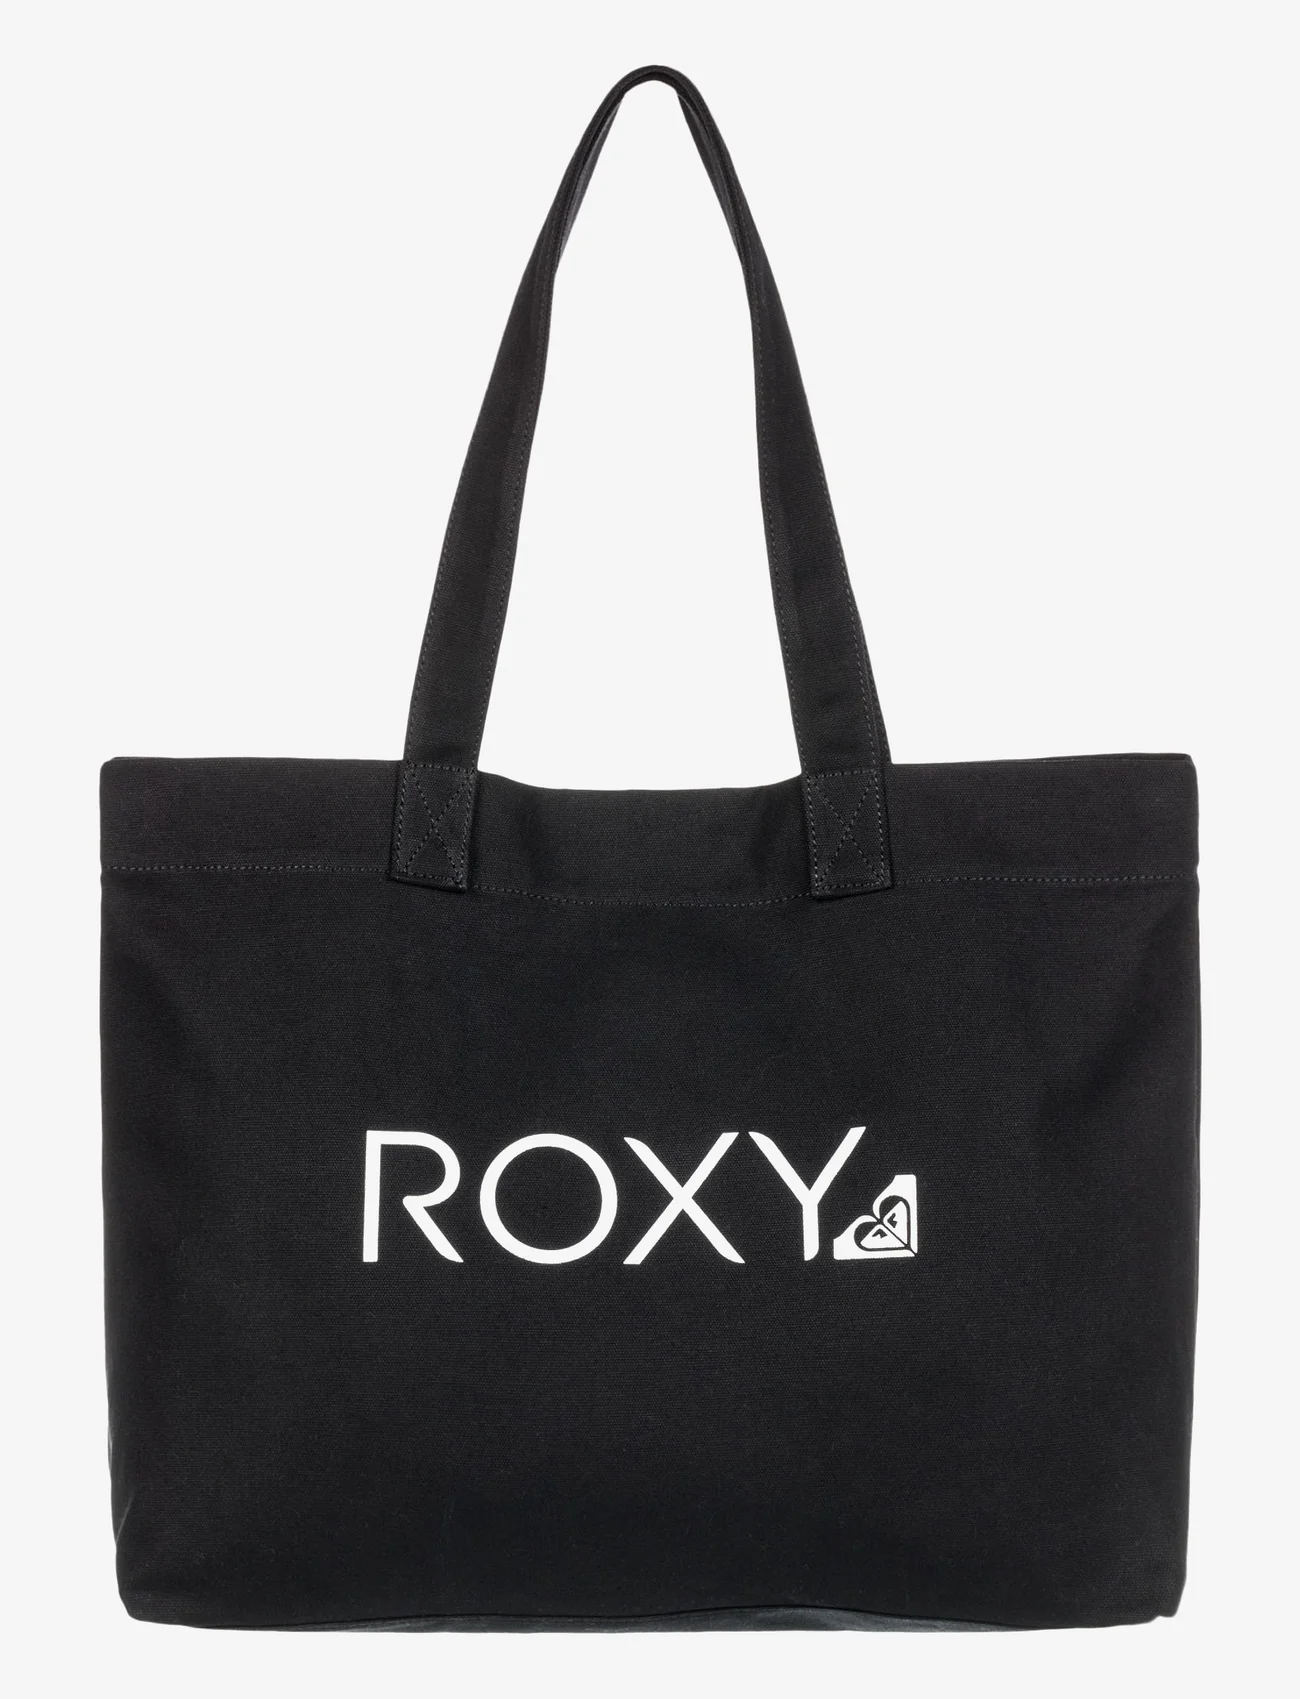 Roxy - GO FOR IT - lowest prices - anthracite - 0